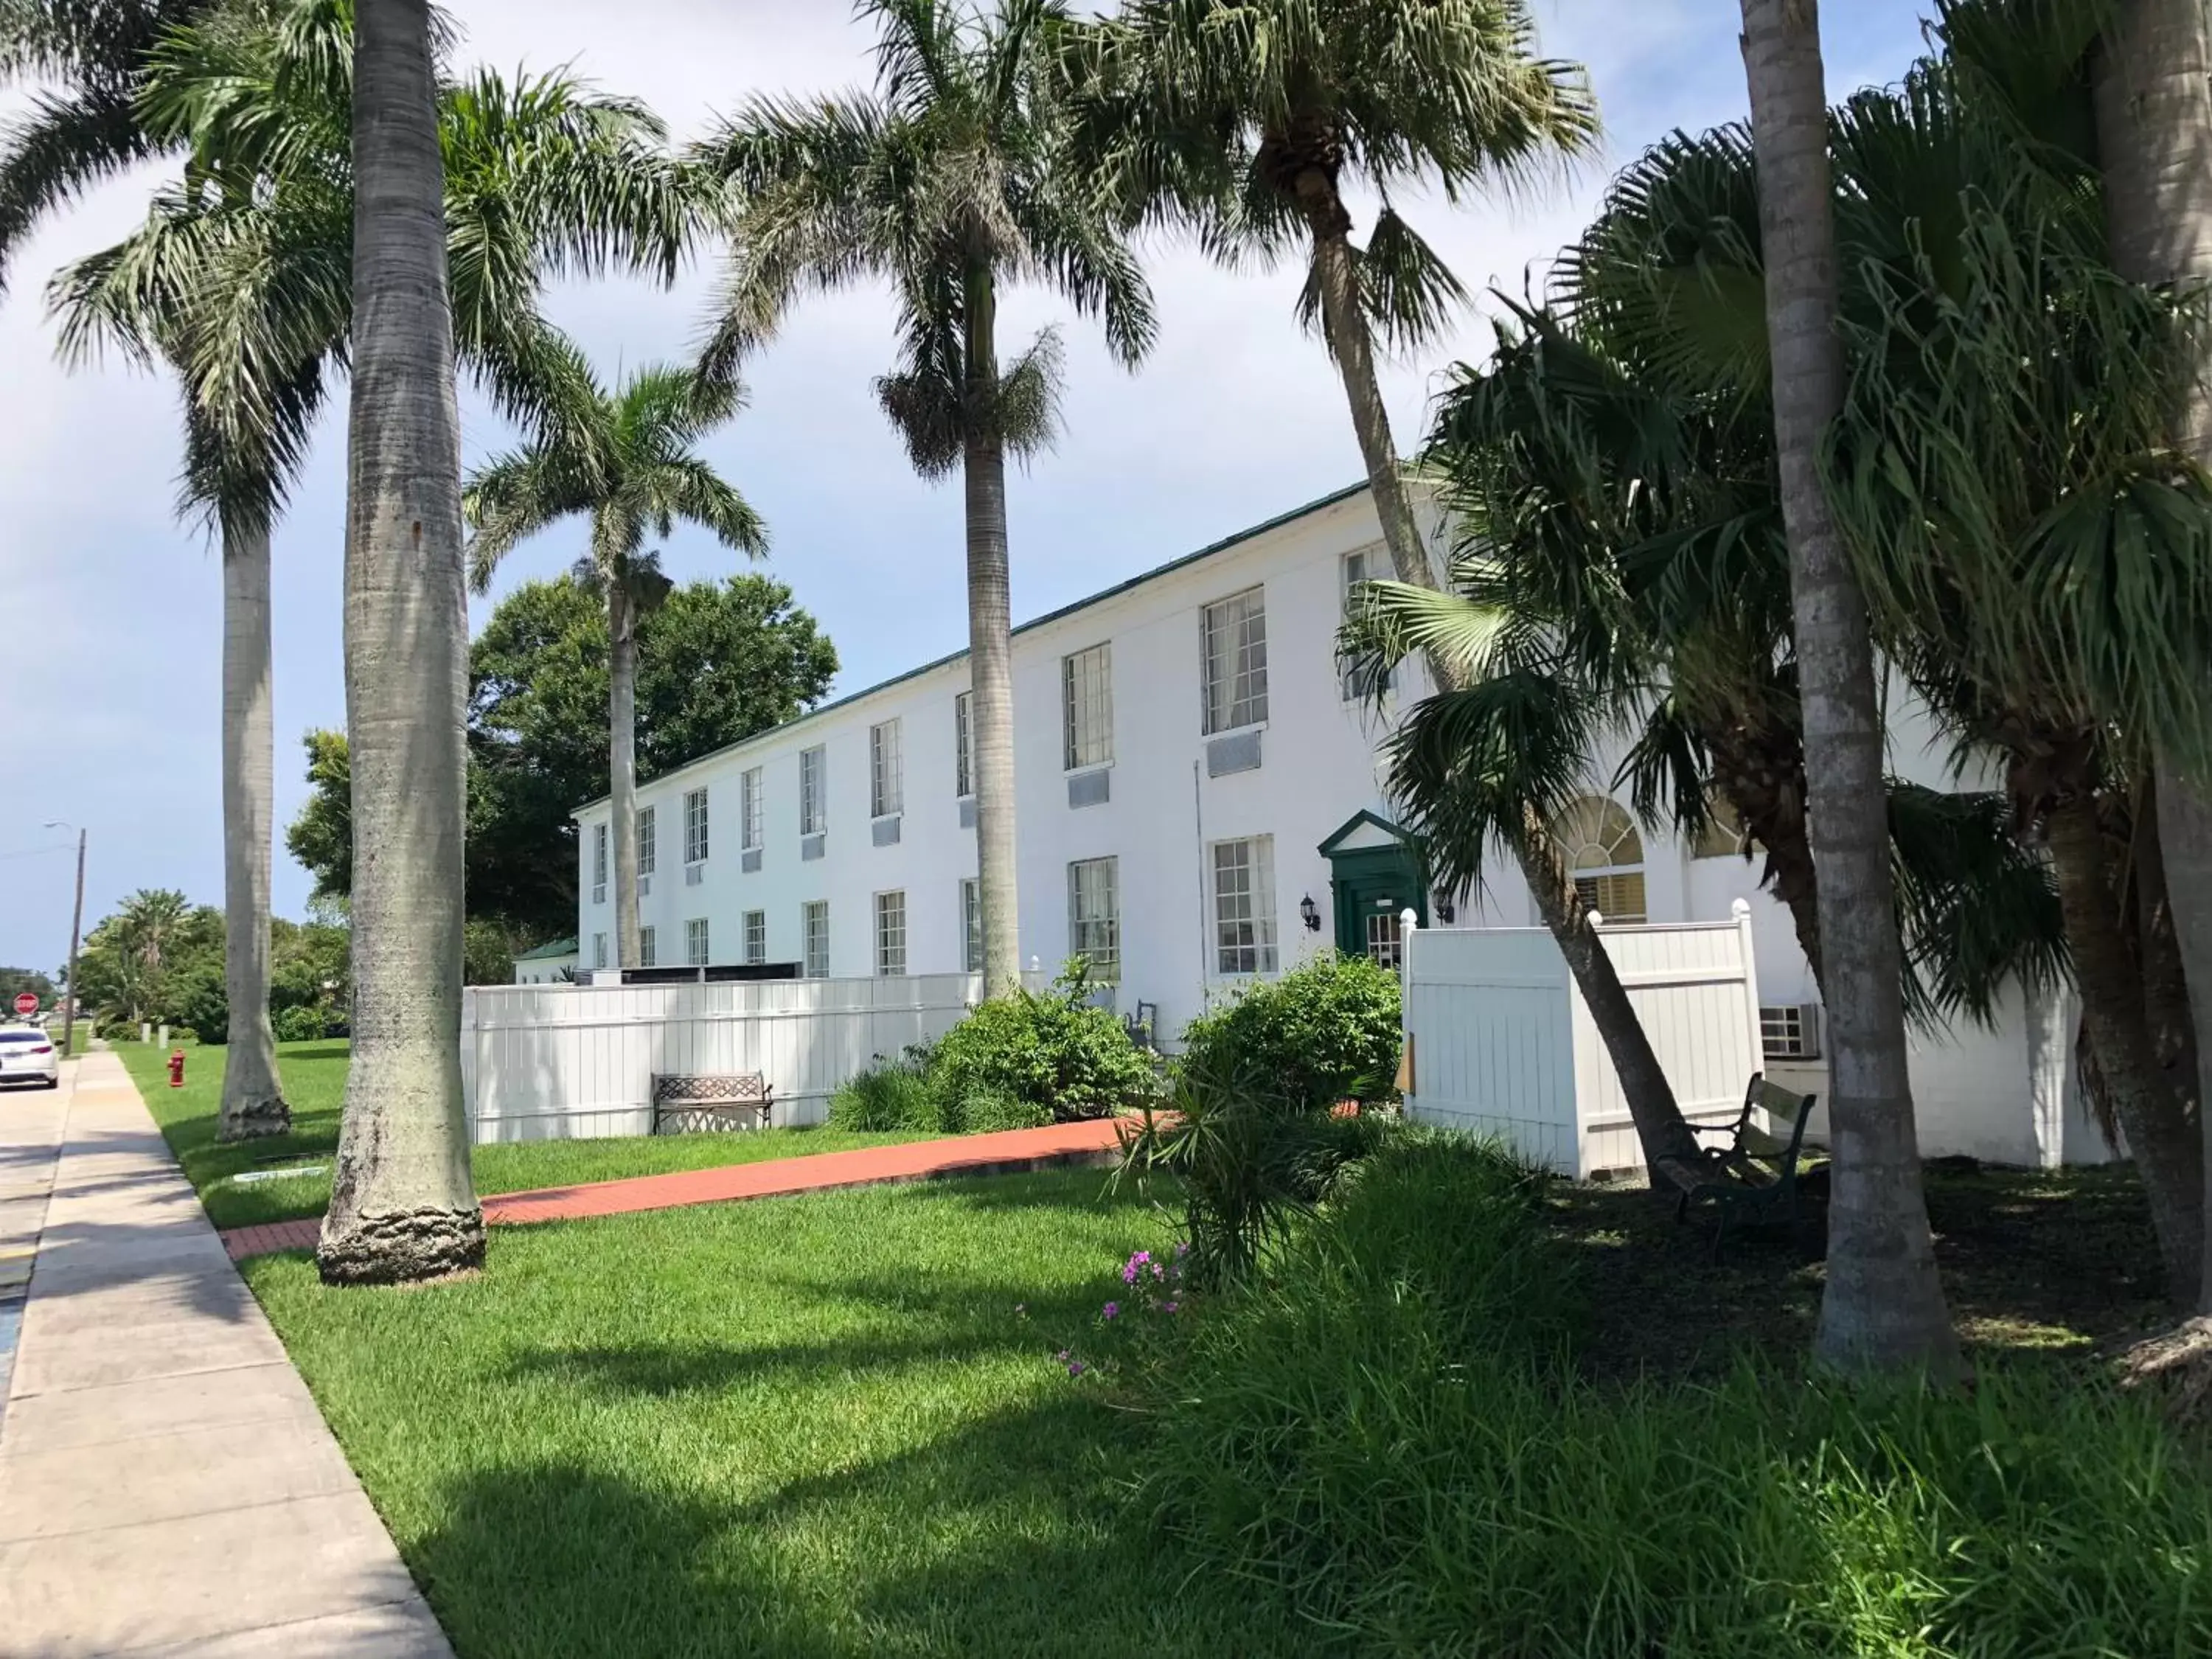 Property Building in Americas Best Value Inn Historic Clewiston Inn